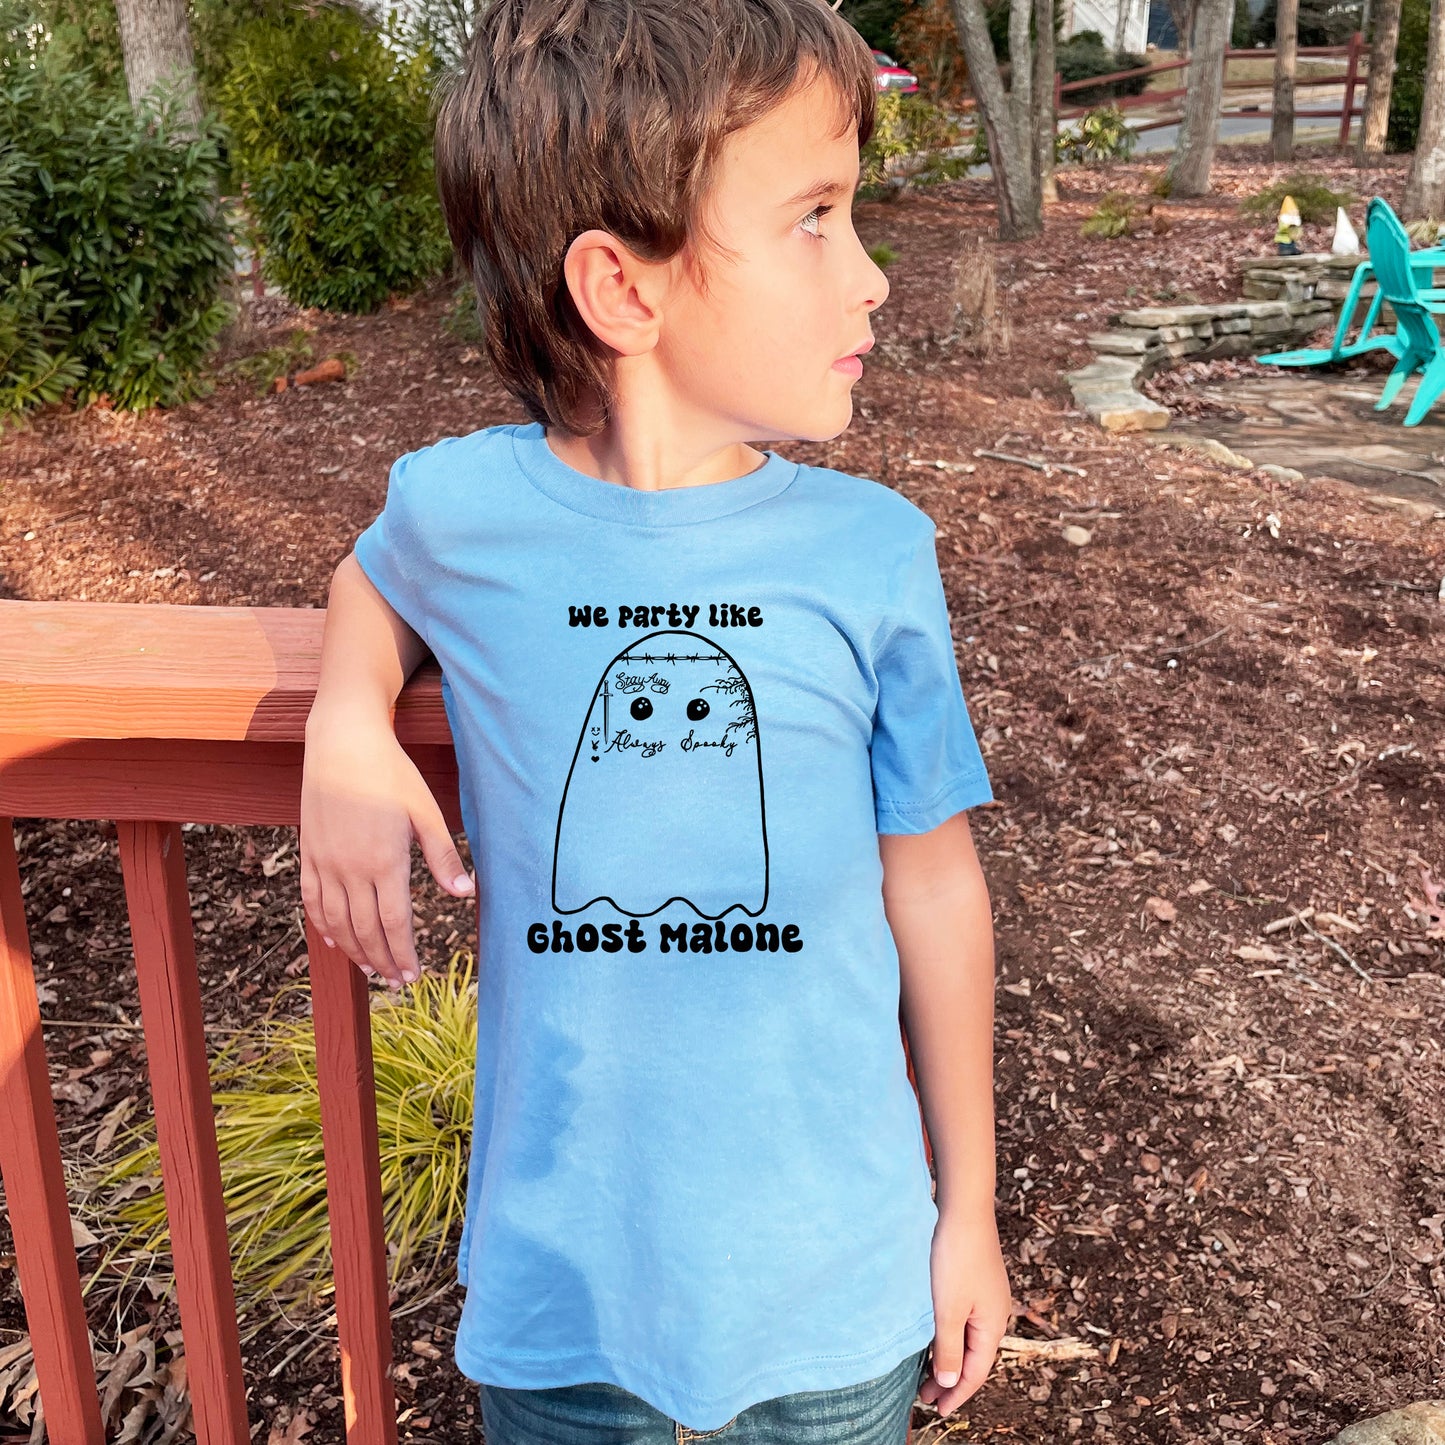 a young boy wearing a blue shirt with a ghost on it